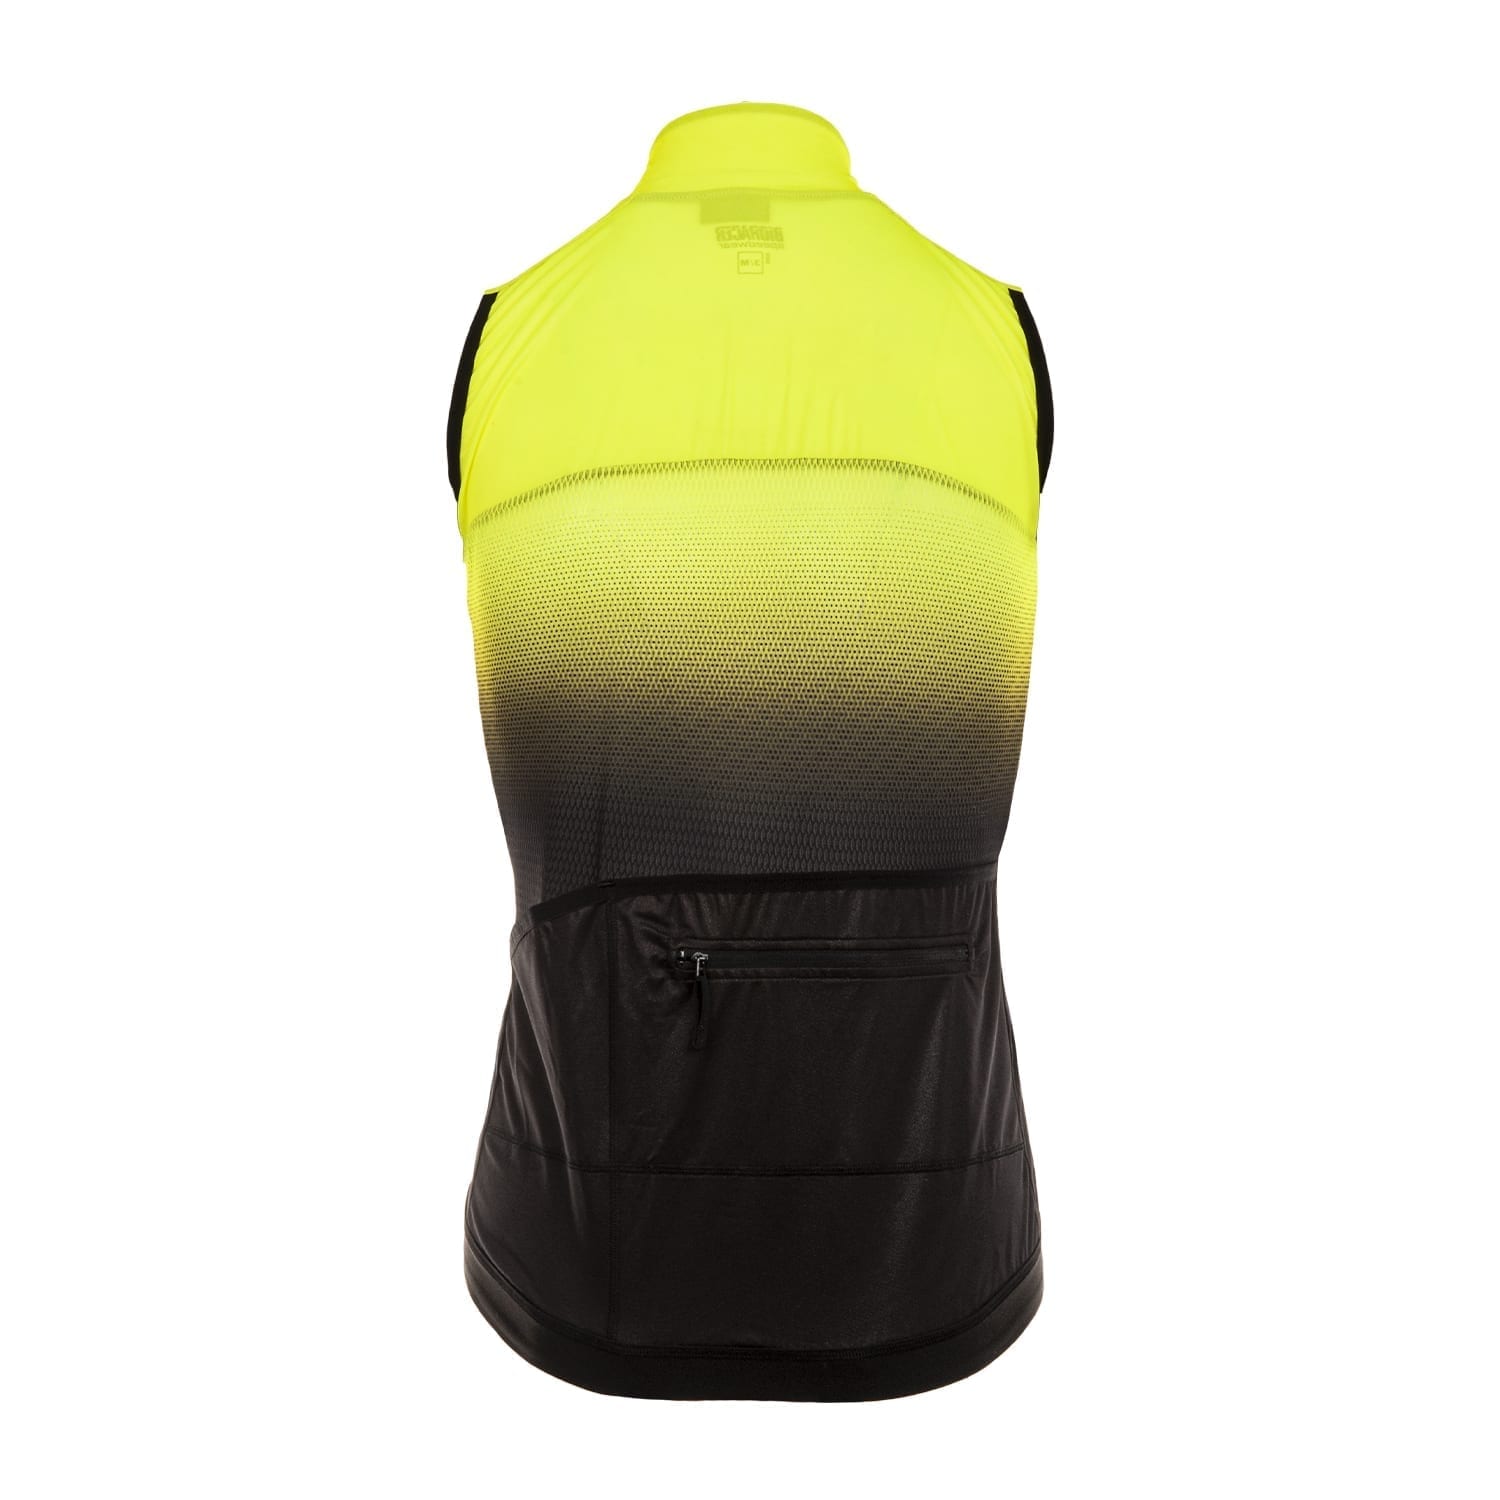 Spitfire Gilet Fluo Yellow